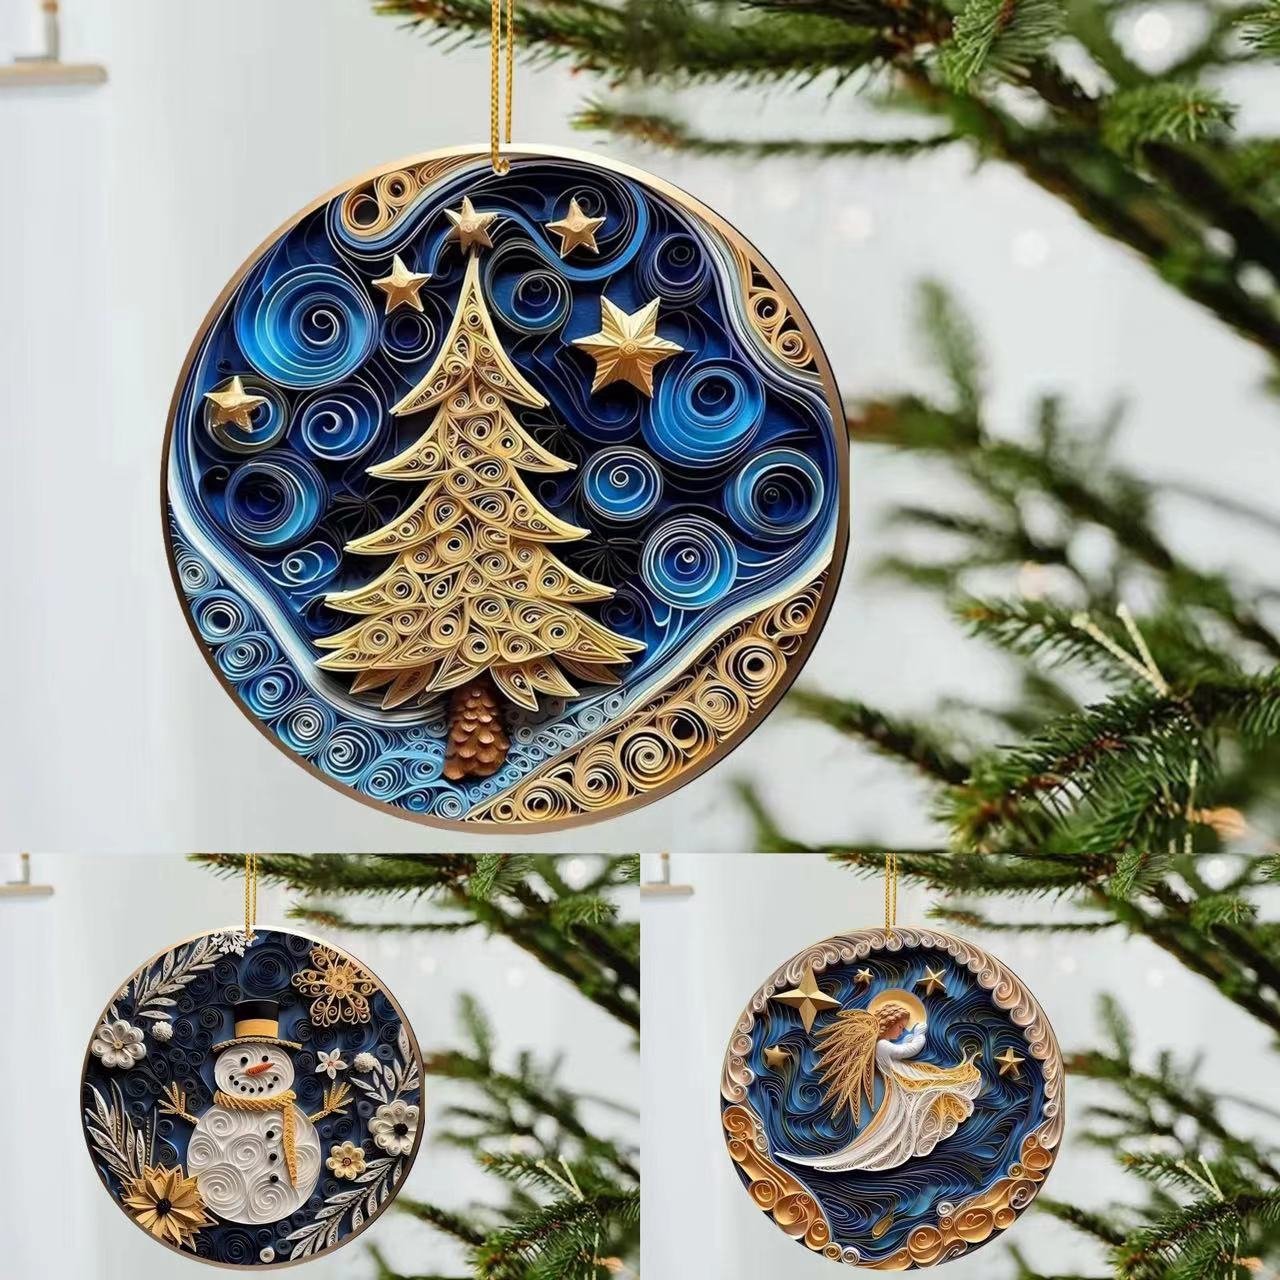 🎁Handmade Ornaments With Good Wishes